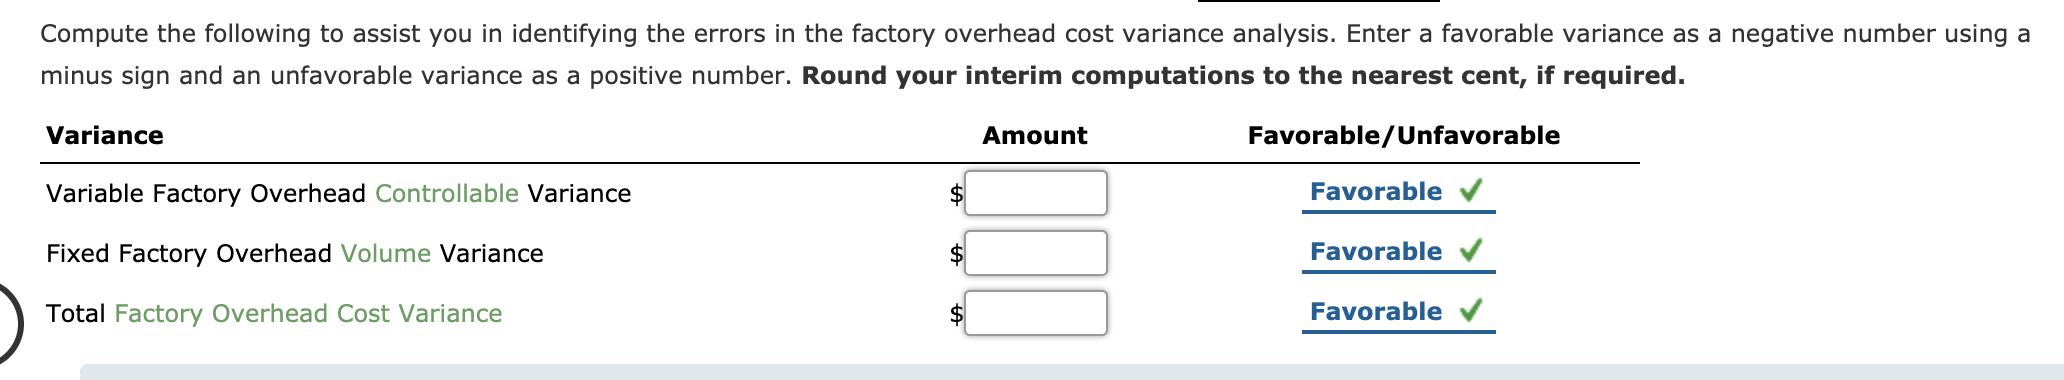 Compute the following to assist you in identifying the errors in the factory overhead cost variance analysis. Enter a favorab